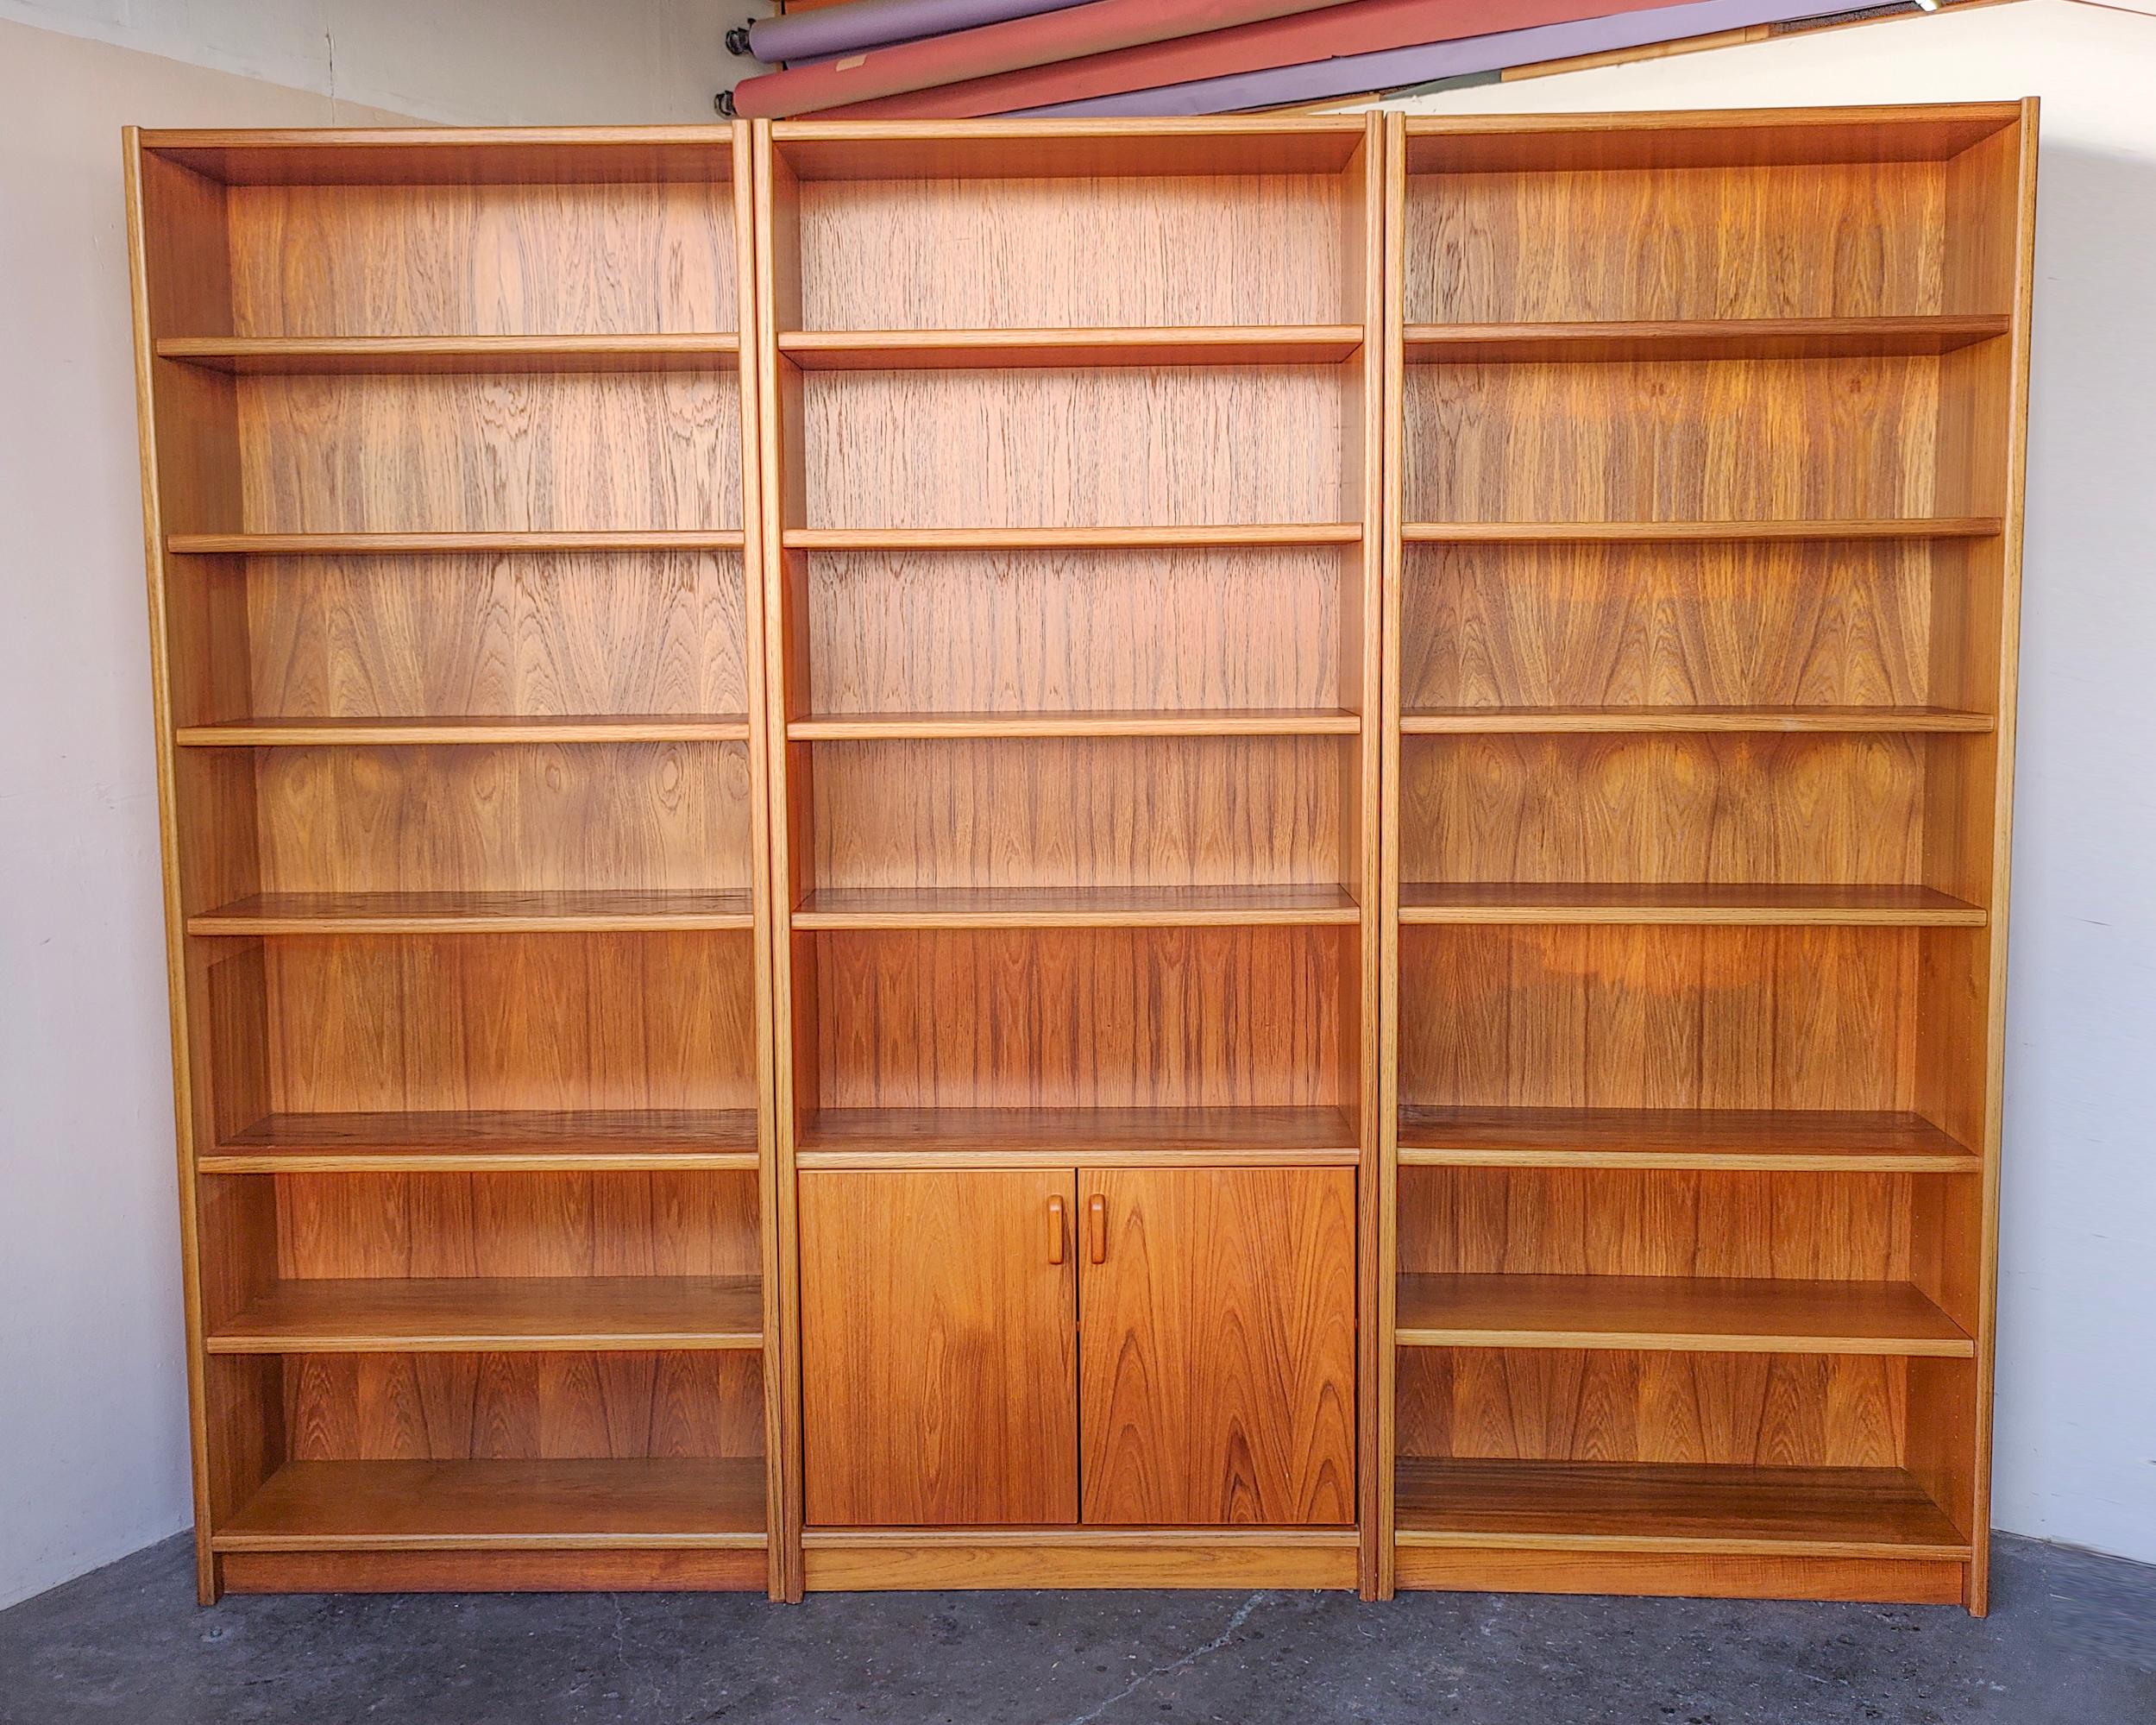 Set of three Danish modern teak bookshelves featuring a matching pair with six shelves on each and a third shelf with cabinet. Adjustable shelves except one fixed in the center. Sun fading on interior surfaces and shelves which would be made more